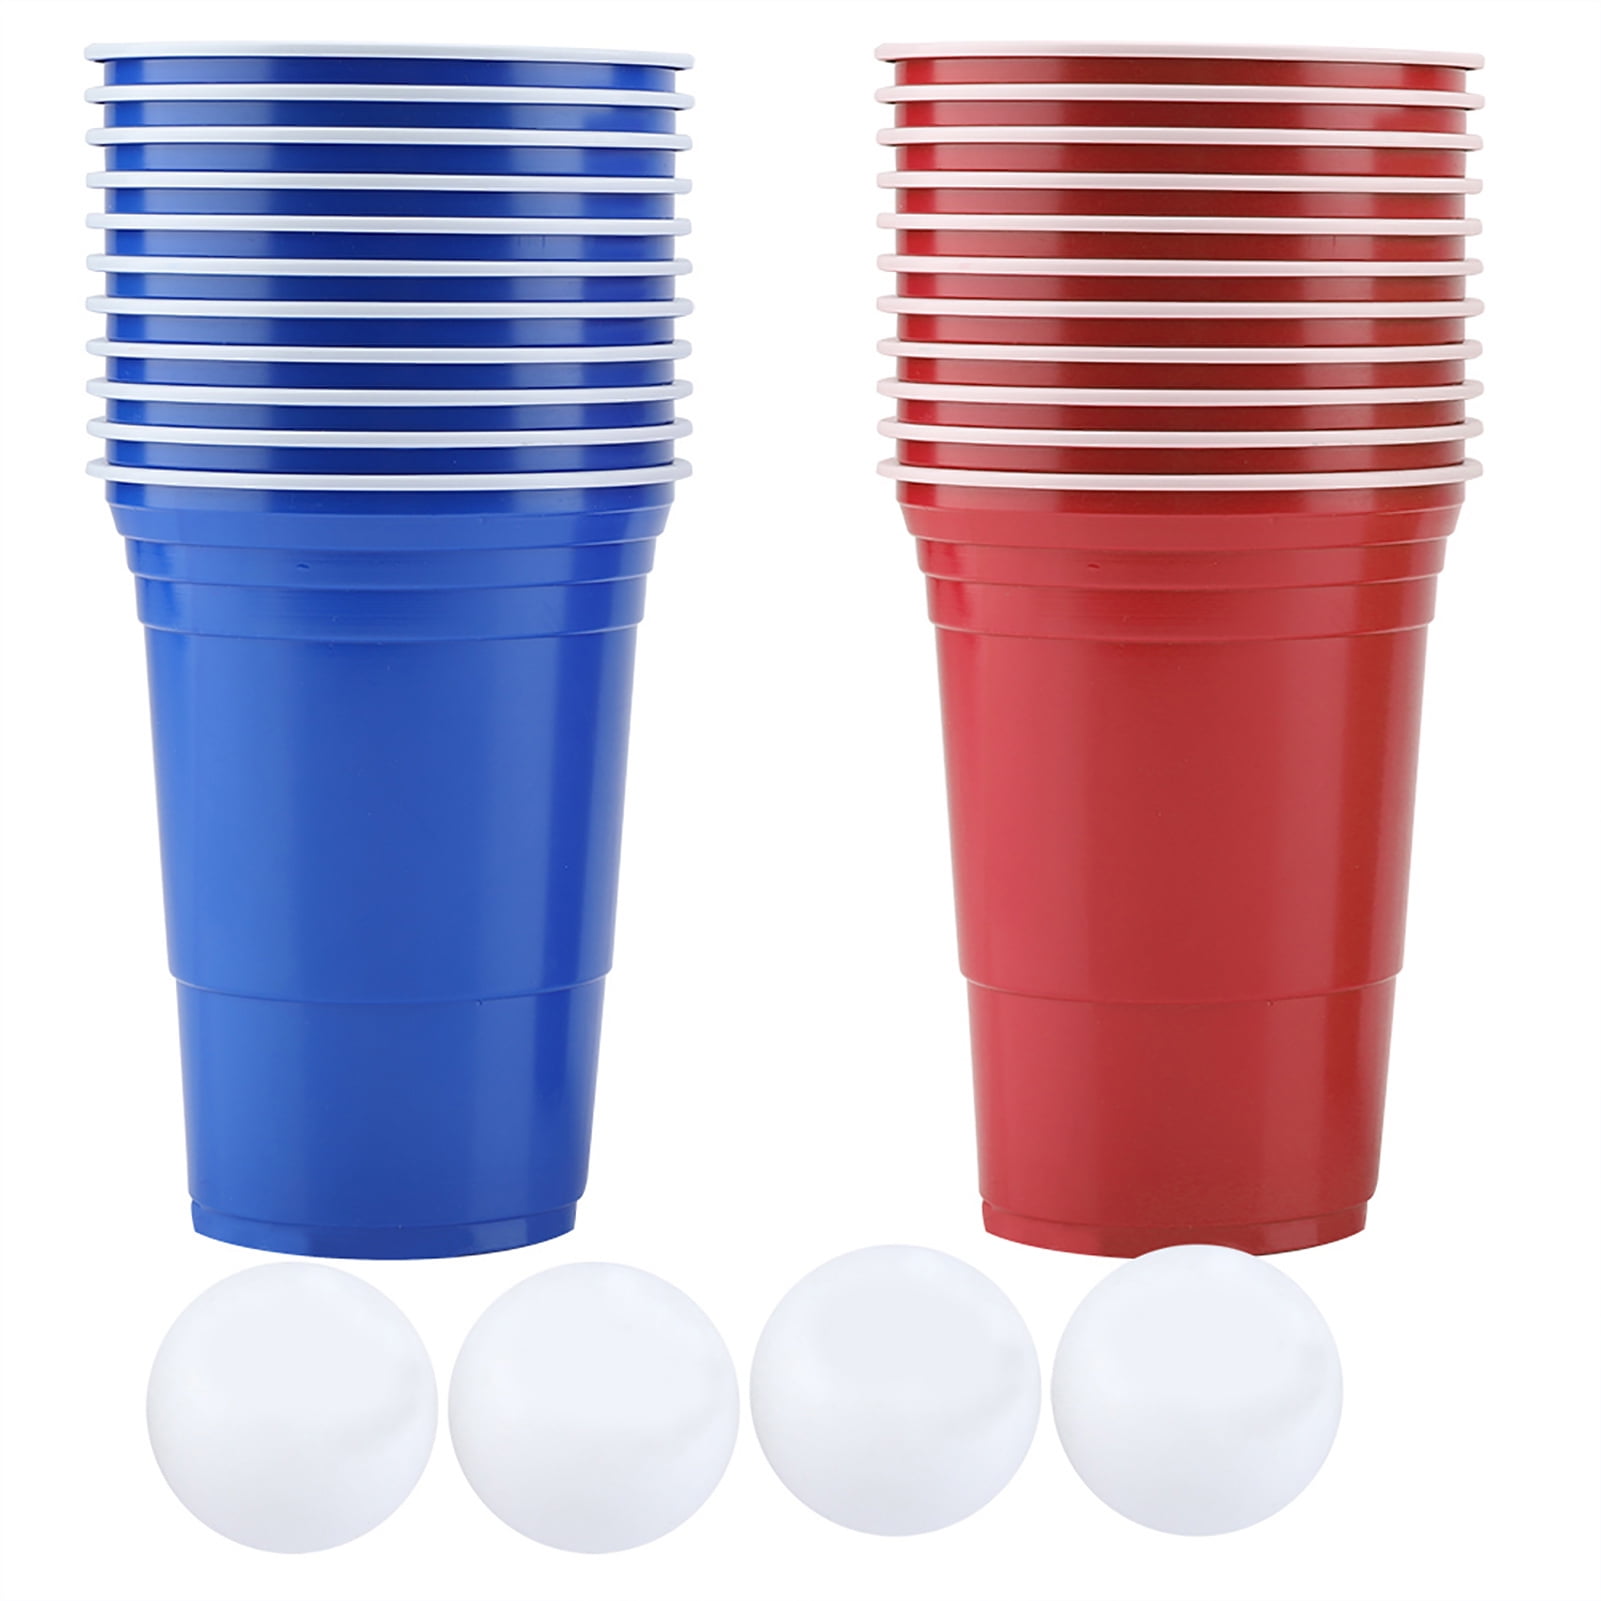  True XL Beer Pong Set with Jumbo Party Cups, Drinking Games for  Adults, Each Cup is 110 Ounces, Includes 20 Cups and 4 XL Pong Balls :  Sports & Outdoors